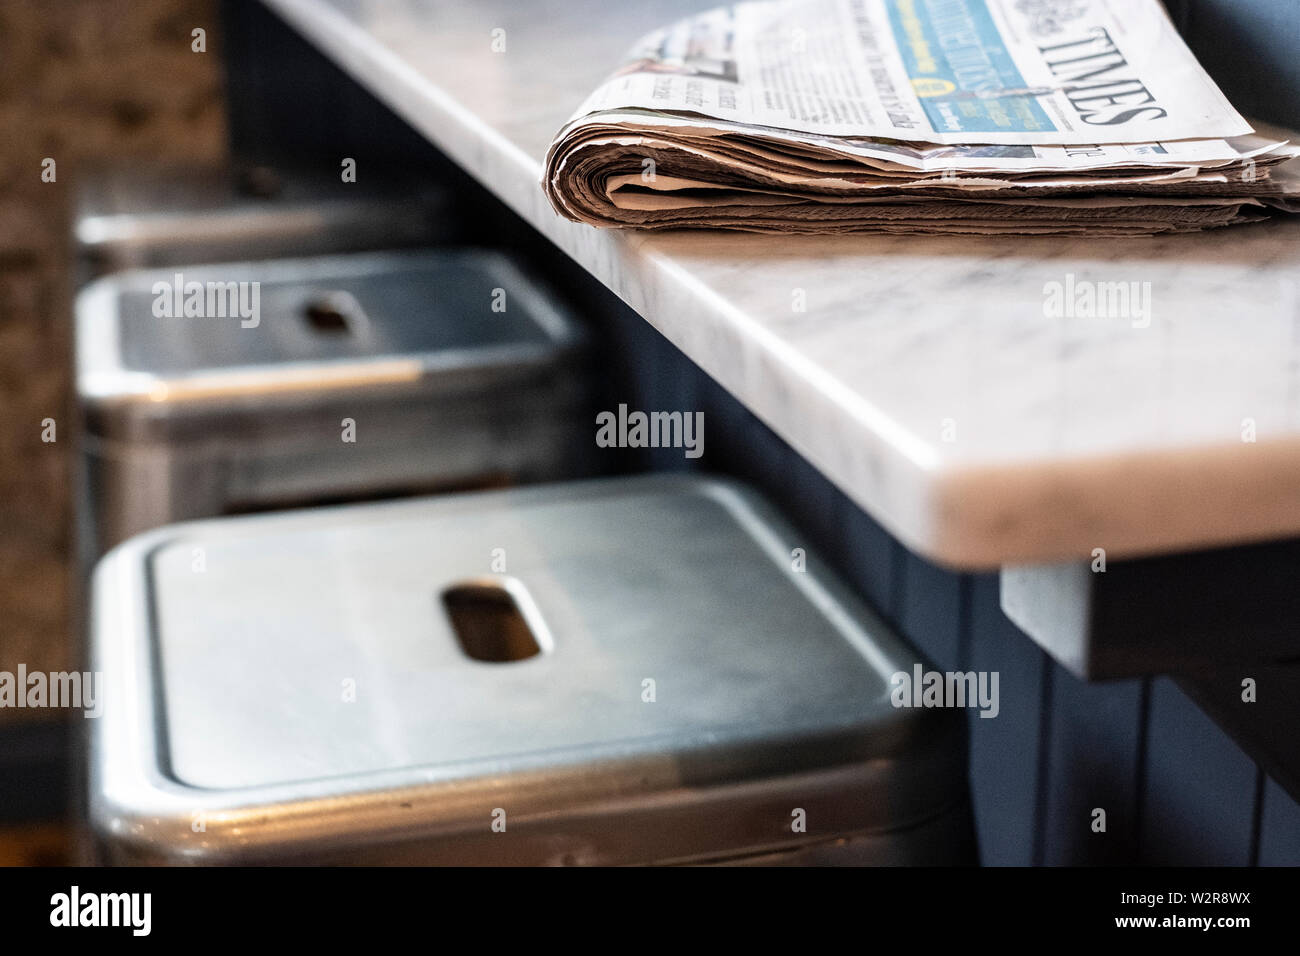 Close up of three stools at a bar counter, folded newspaper on top. Stock Photo